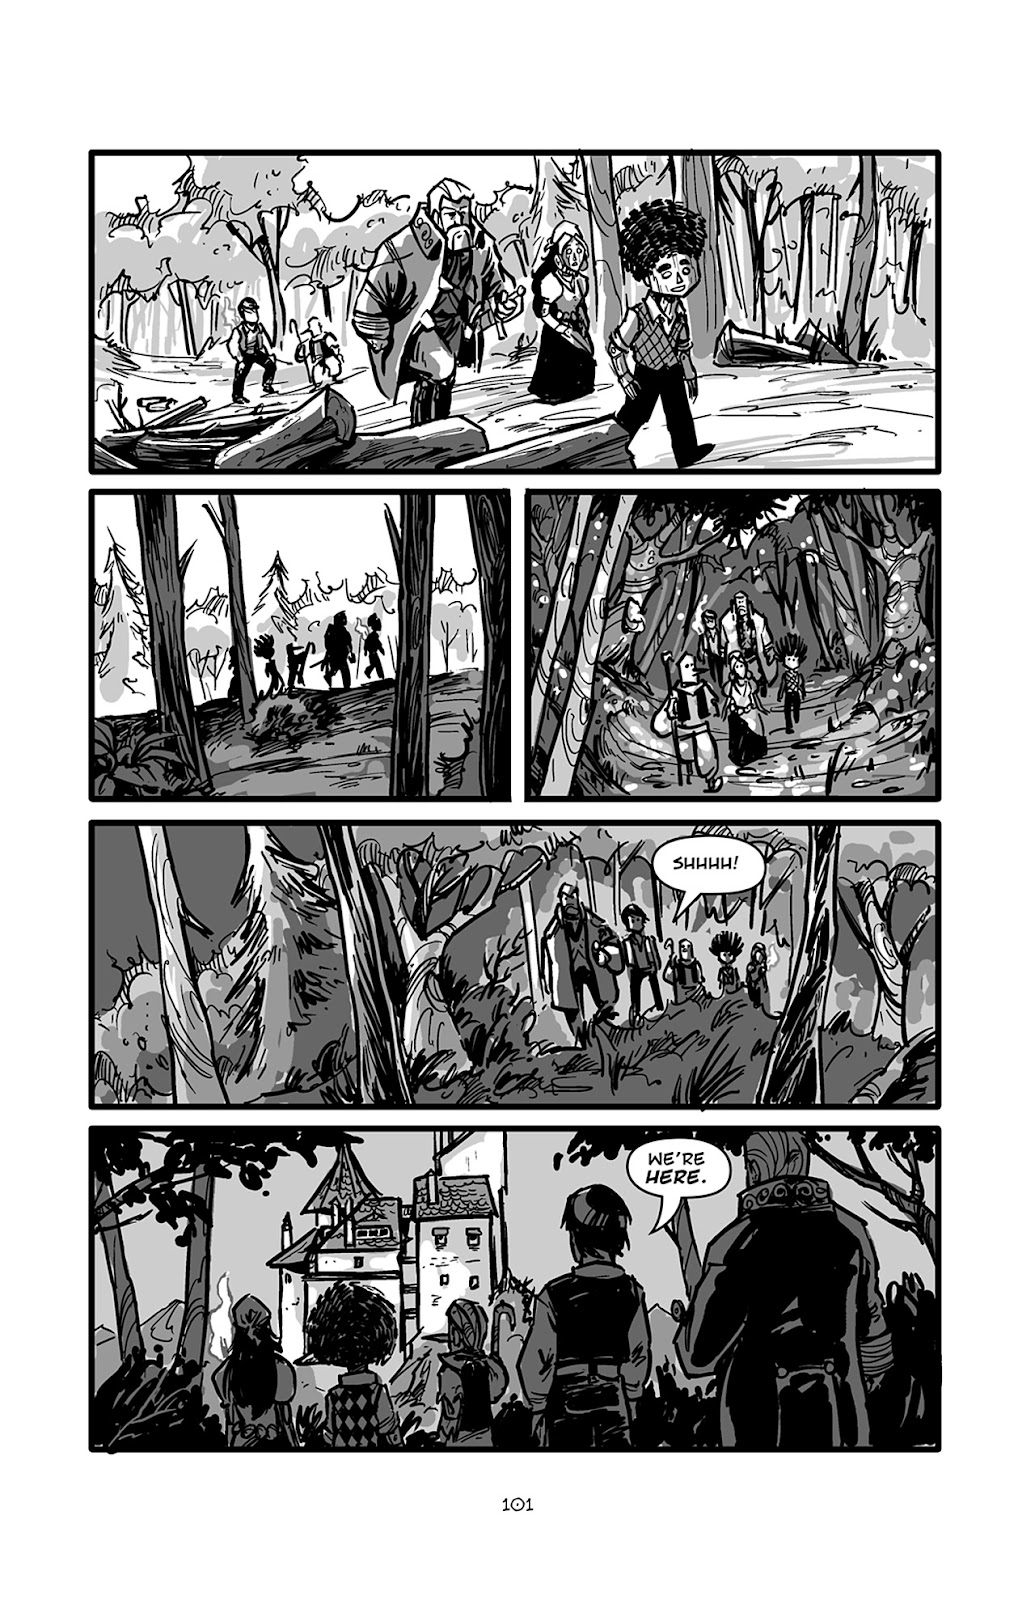 Pinocchio: Vampire Slayer - Of Wood and Blood issue 5 - Page 2